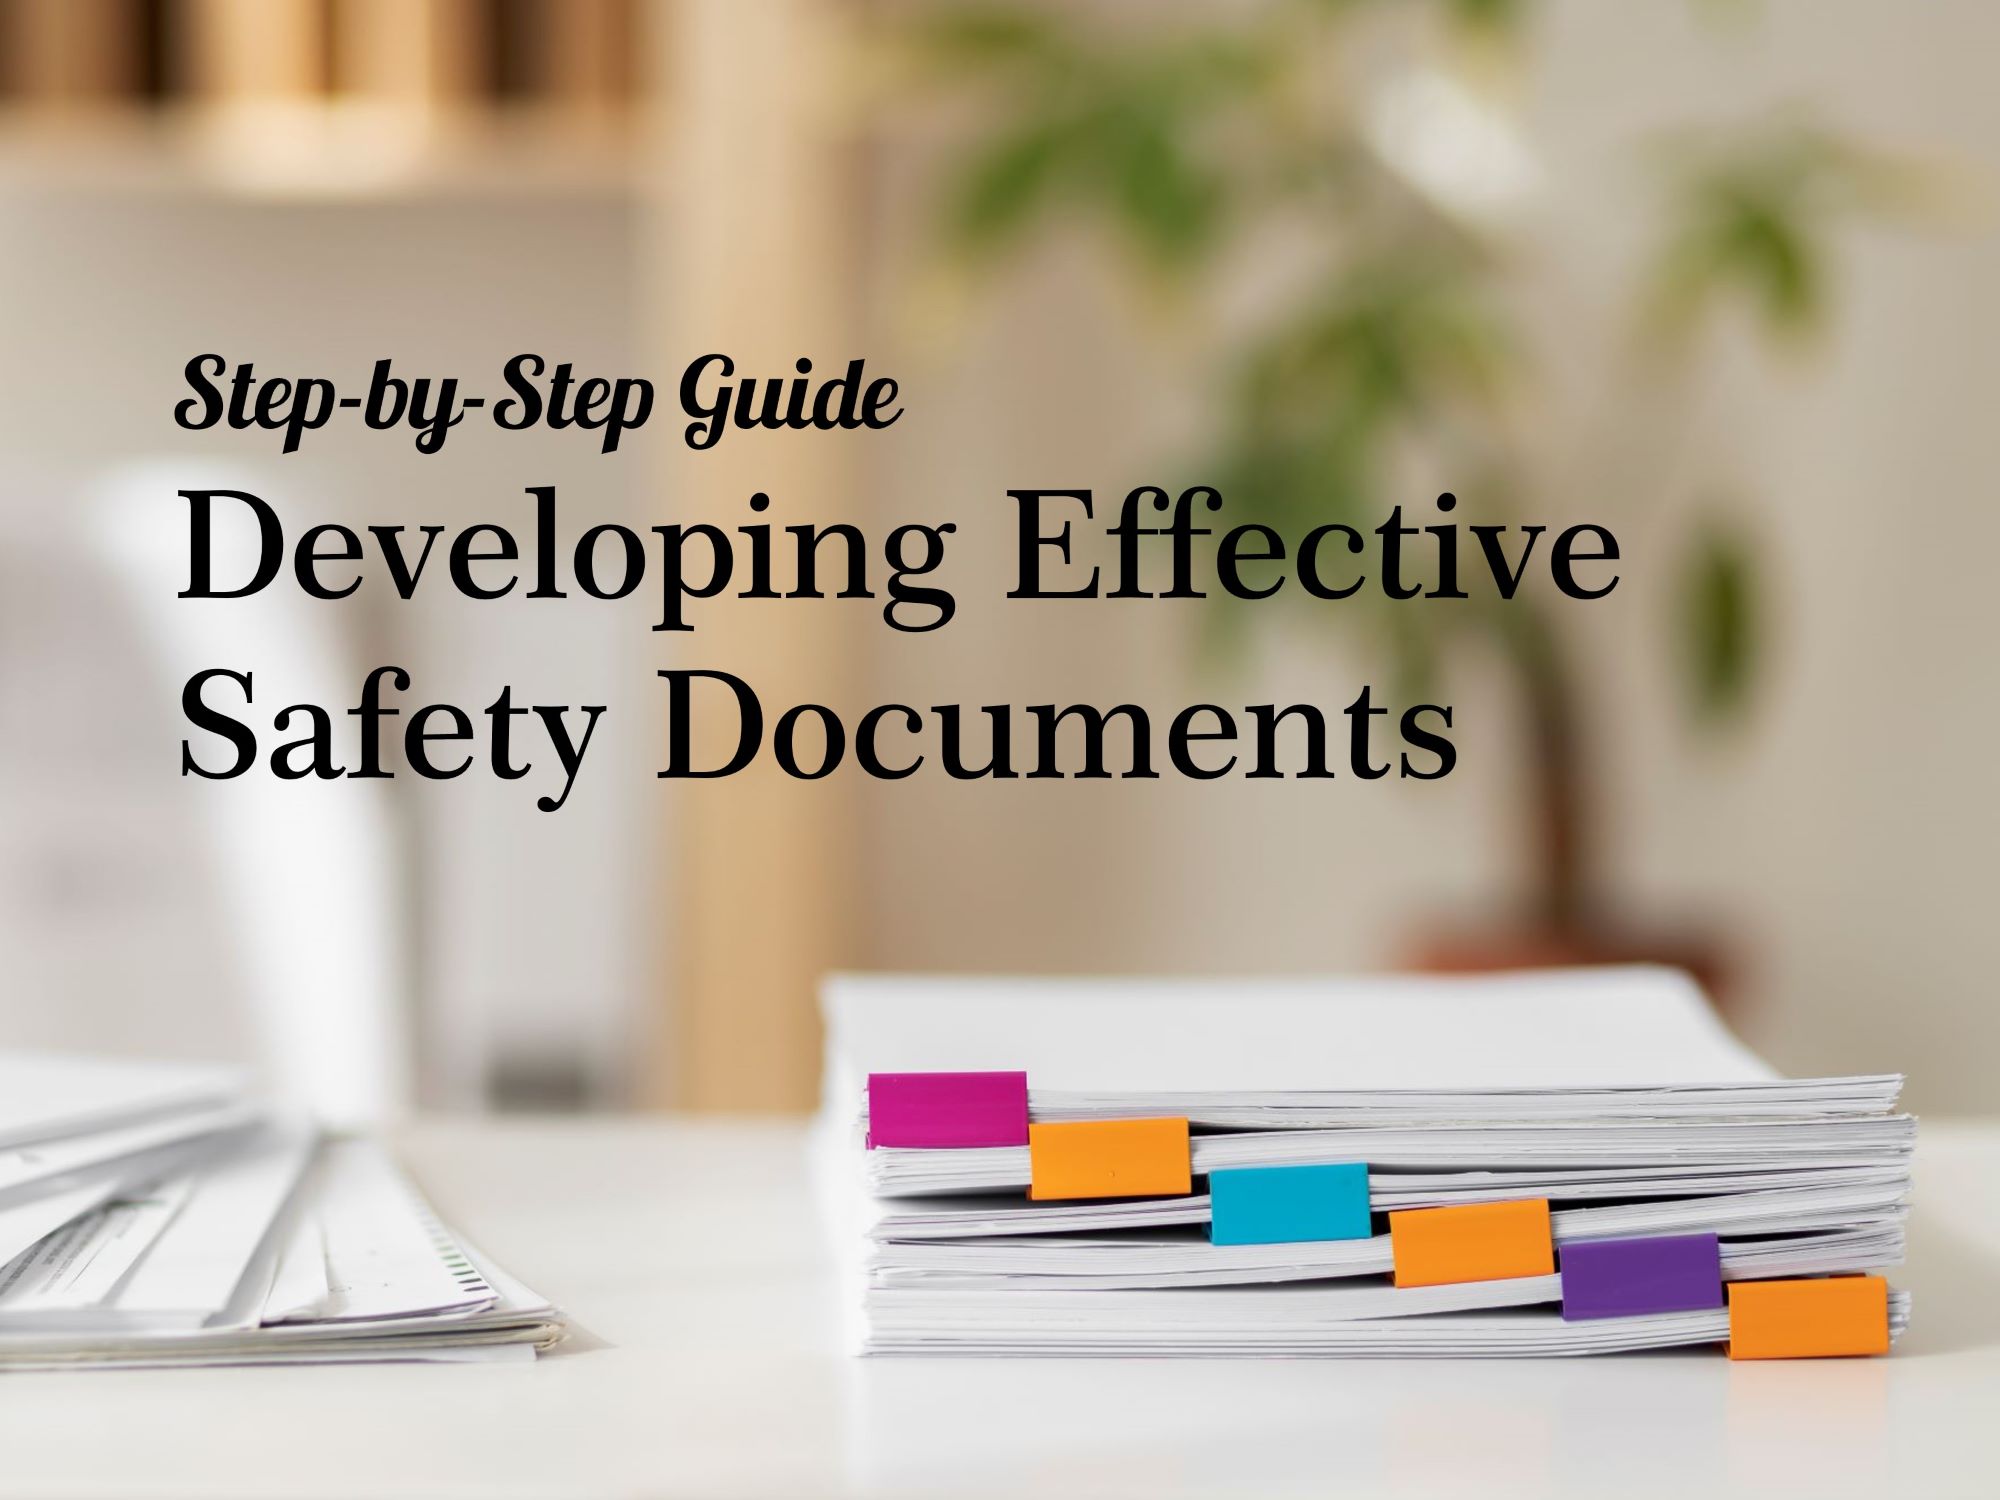 Step-by-Step Guide to Developing Effective Safety Documents